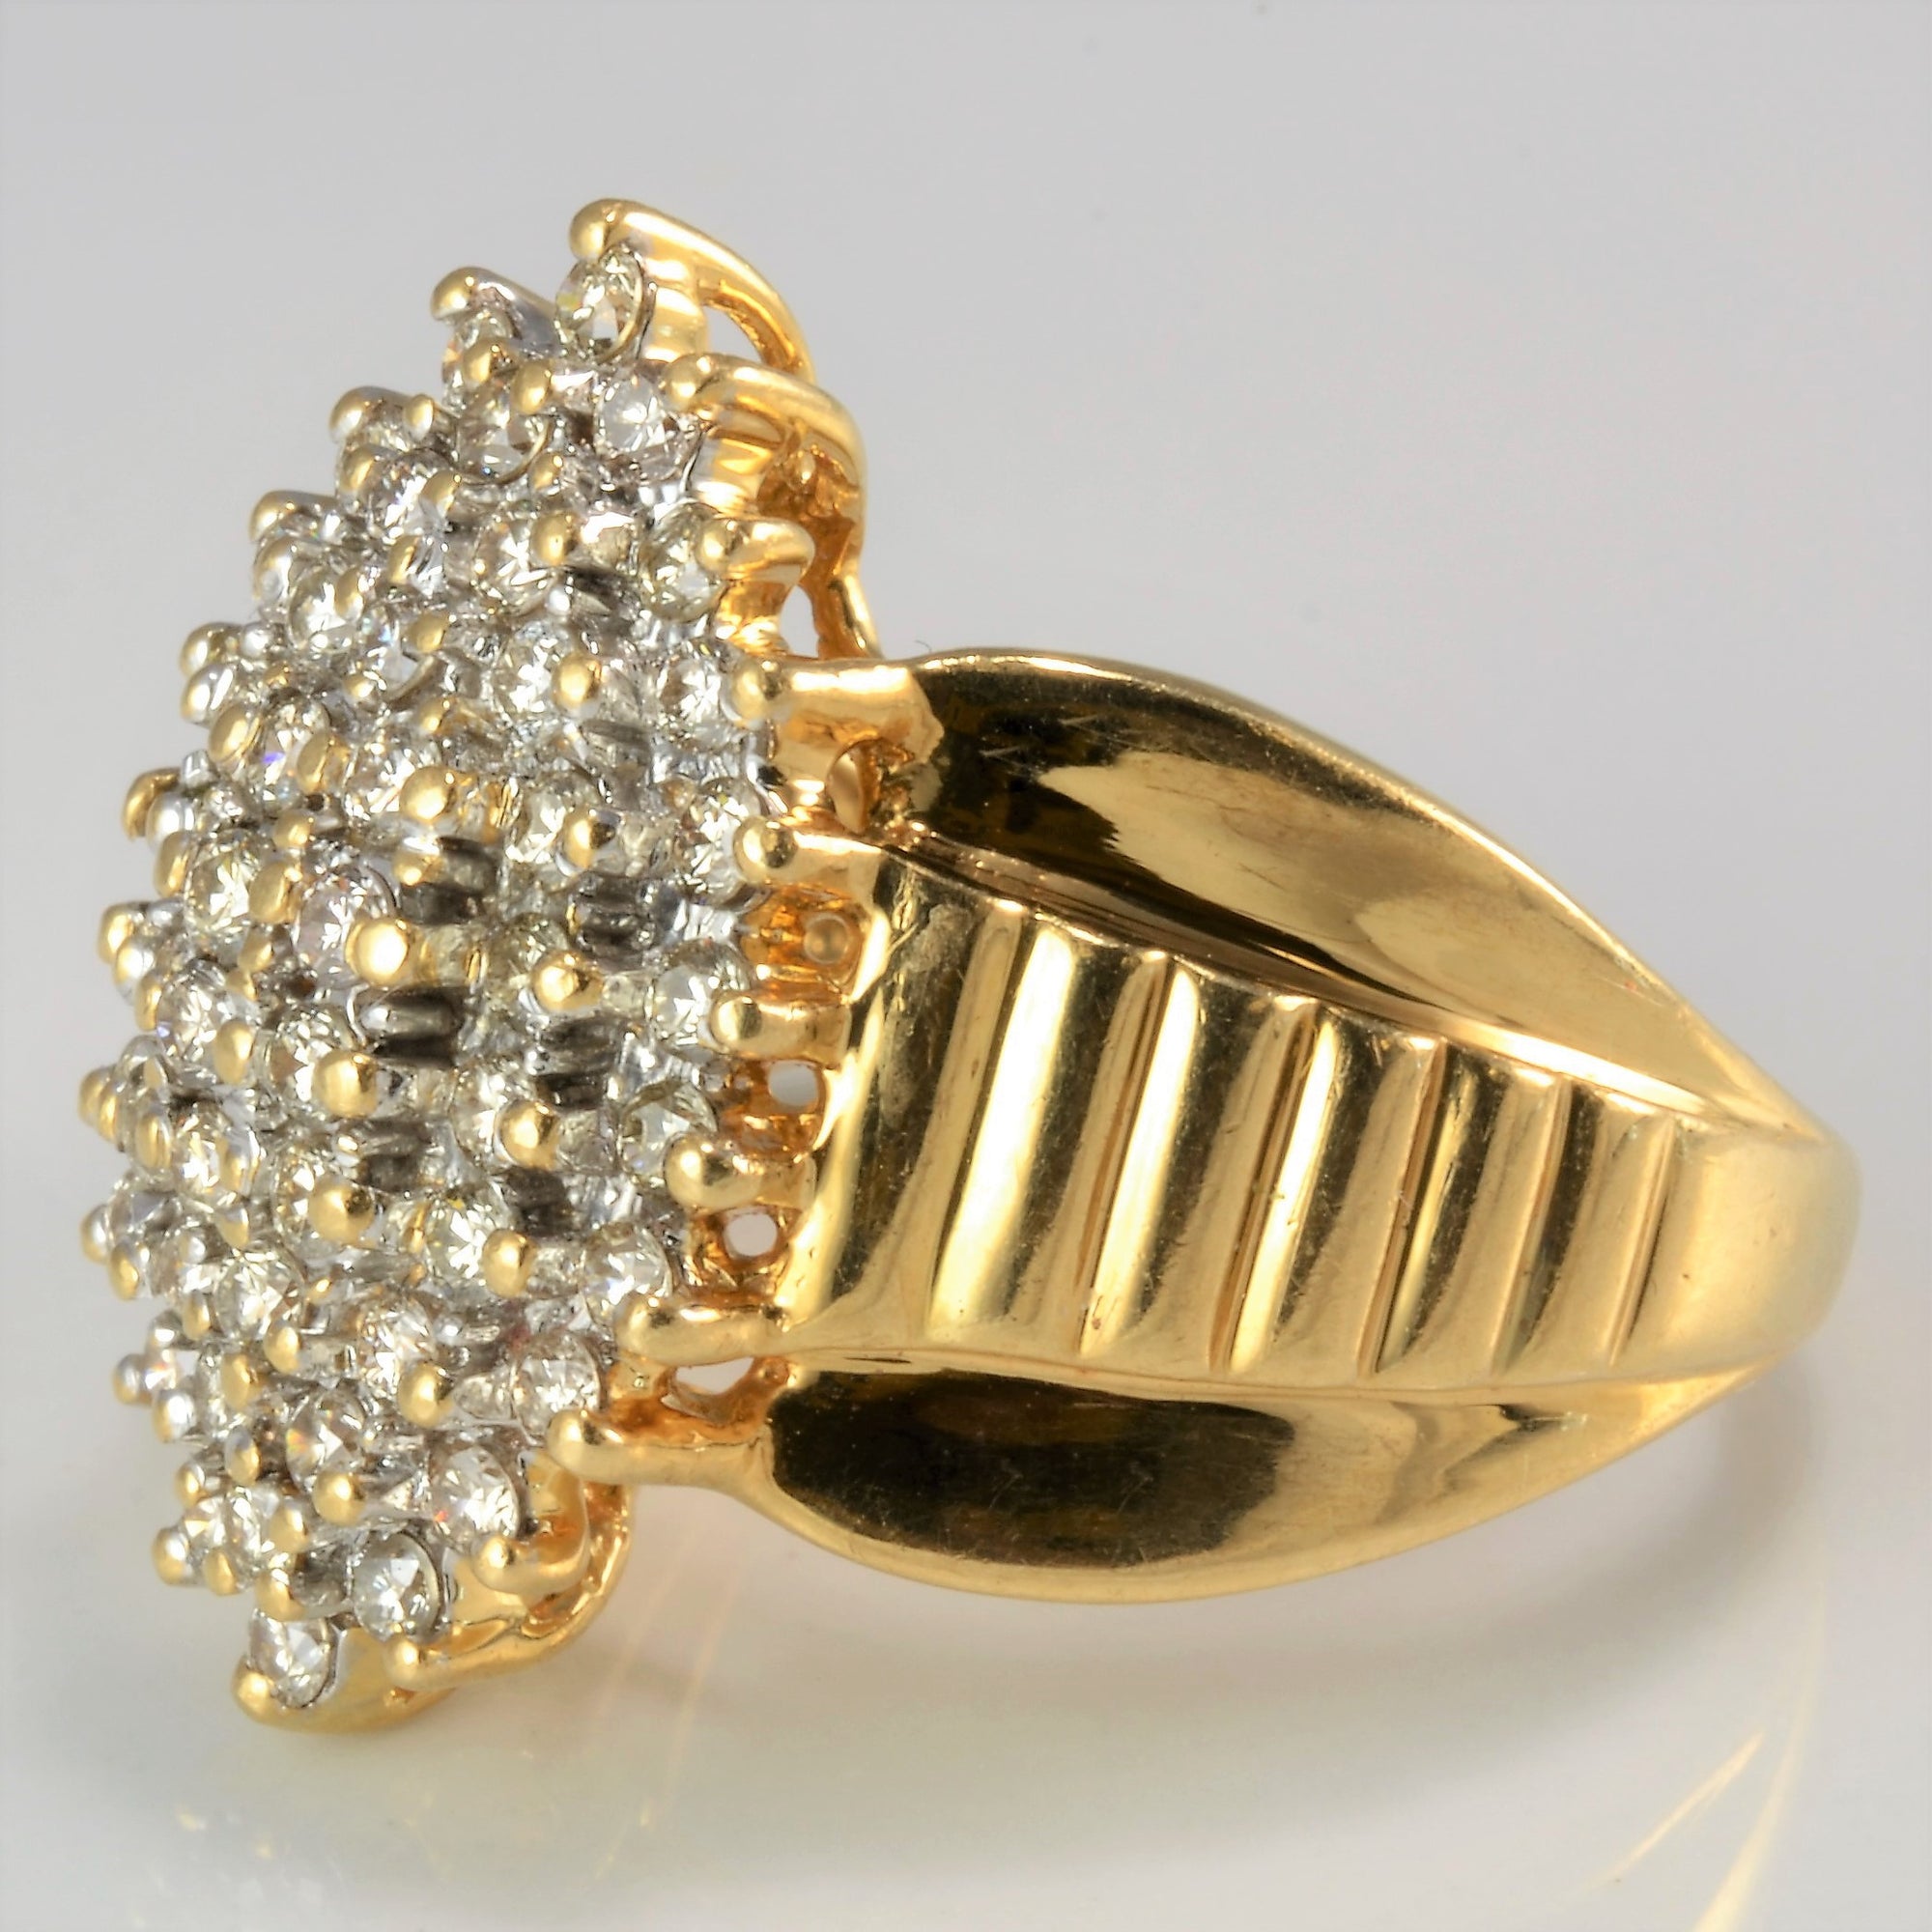 Marquise Shaped Diamond Cluster Ring | 0.83 ctw, SZ 7 |